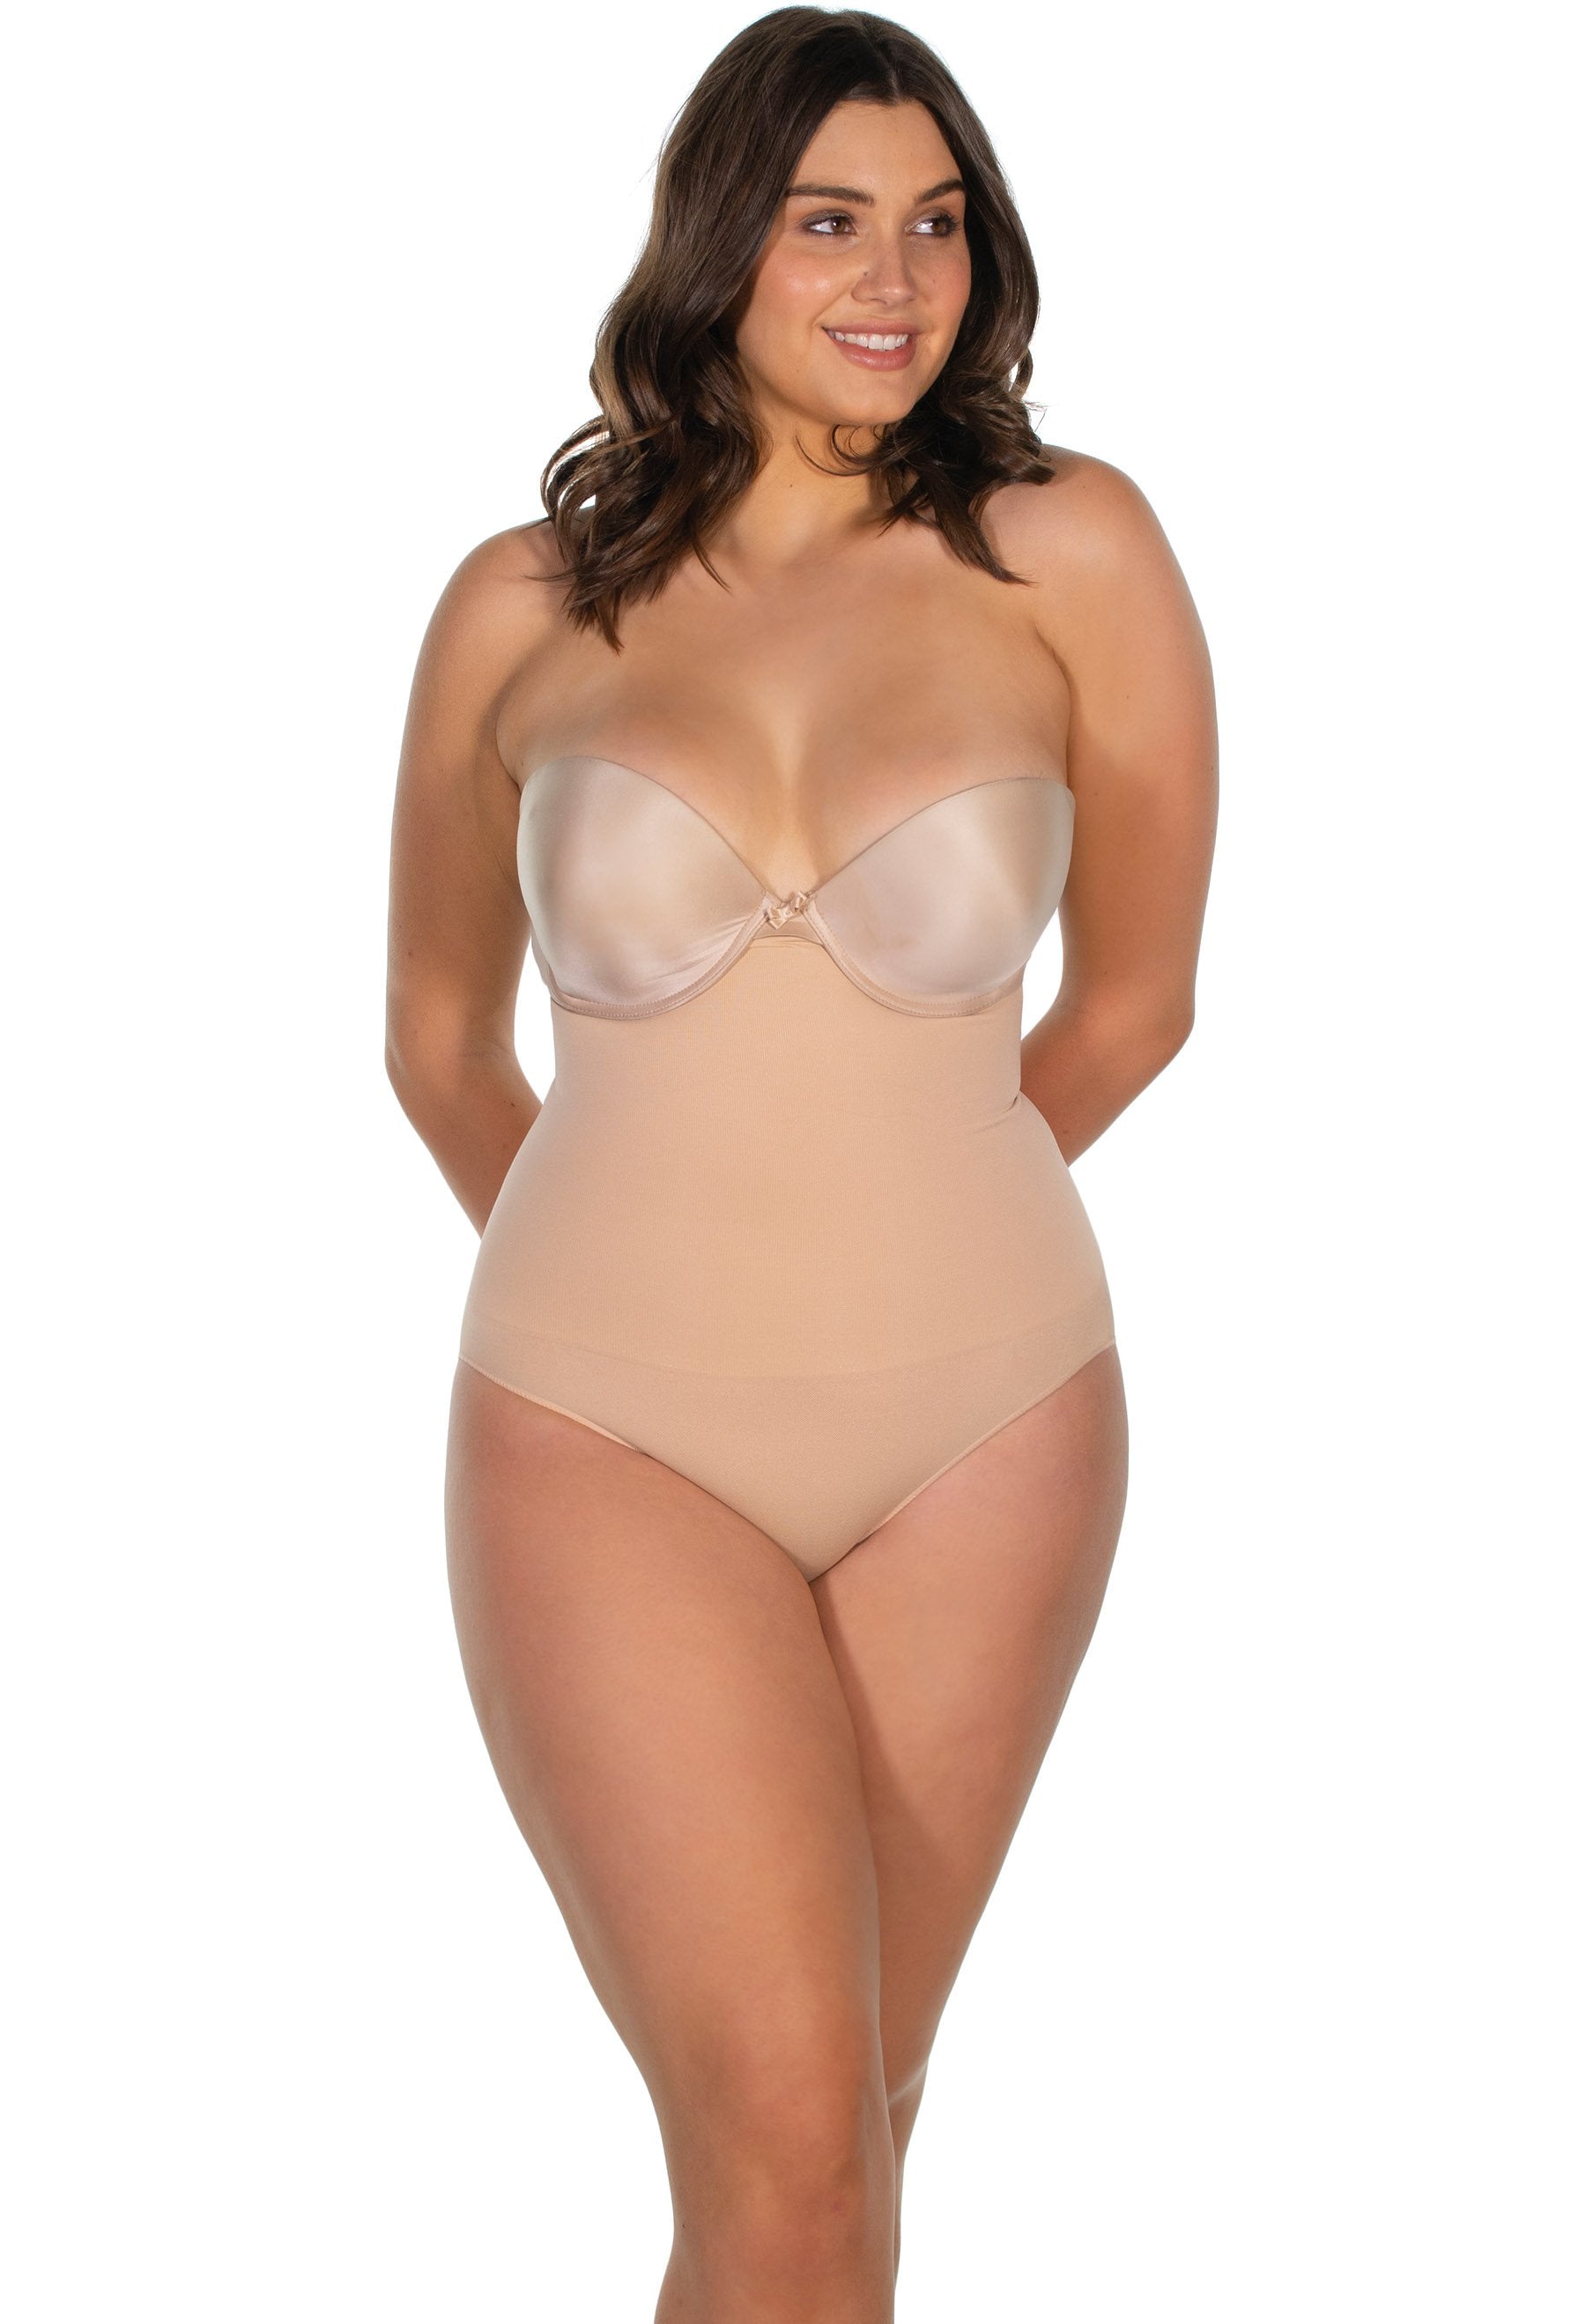 Streamlined Curves Firm Tummy Compression Bodysuit Shaper